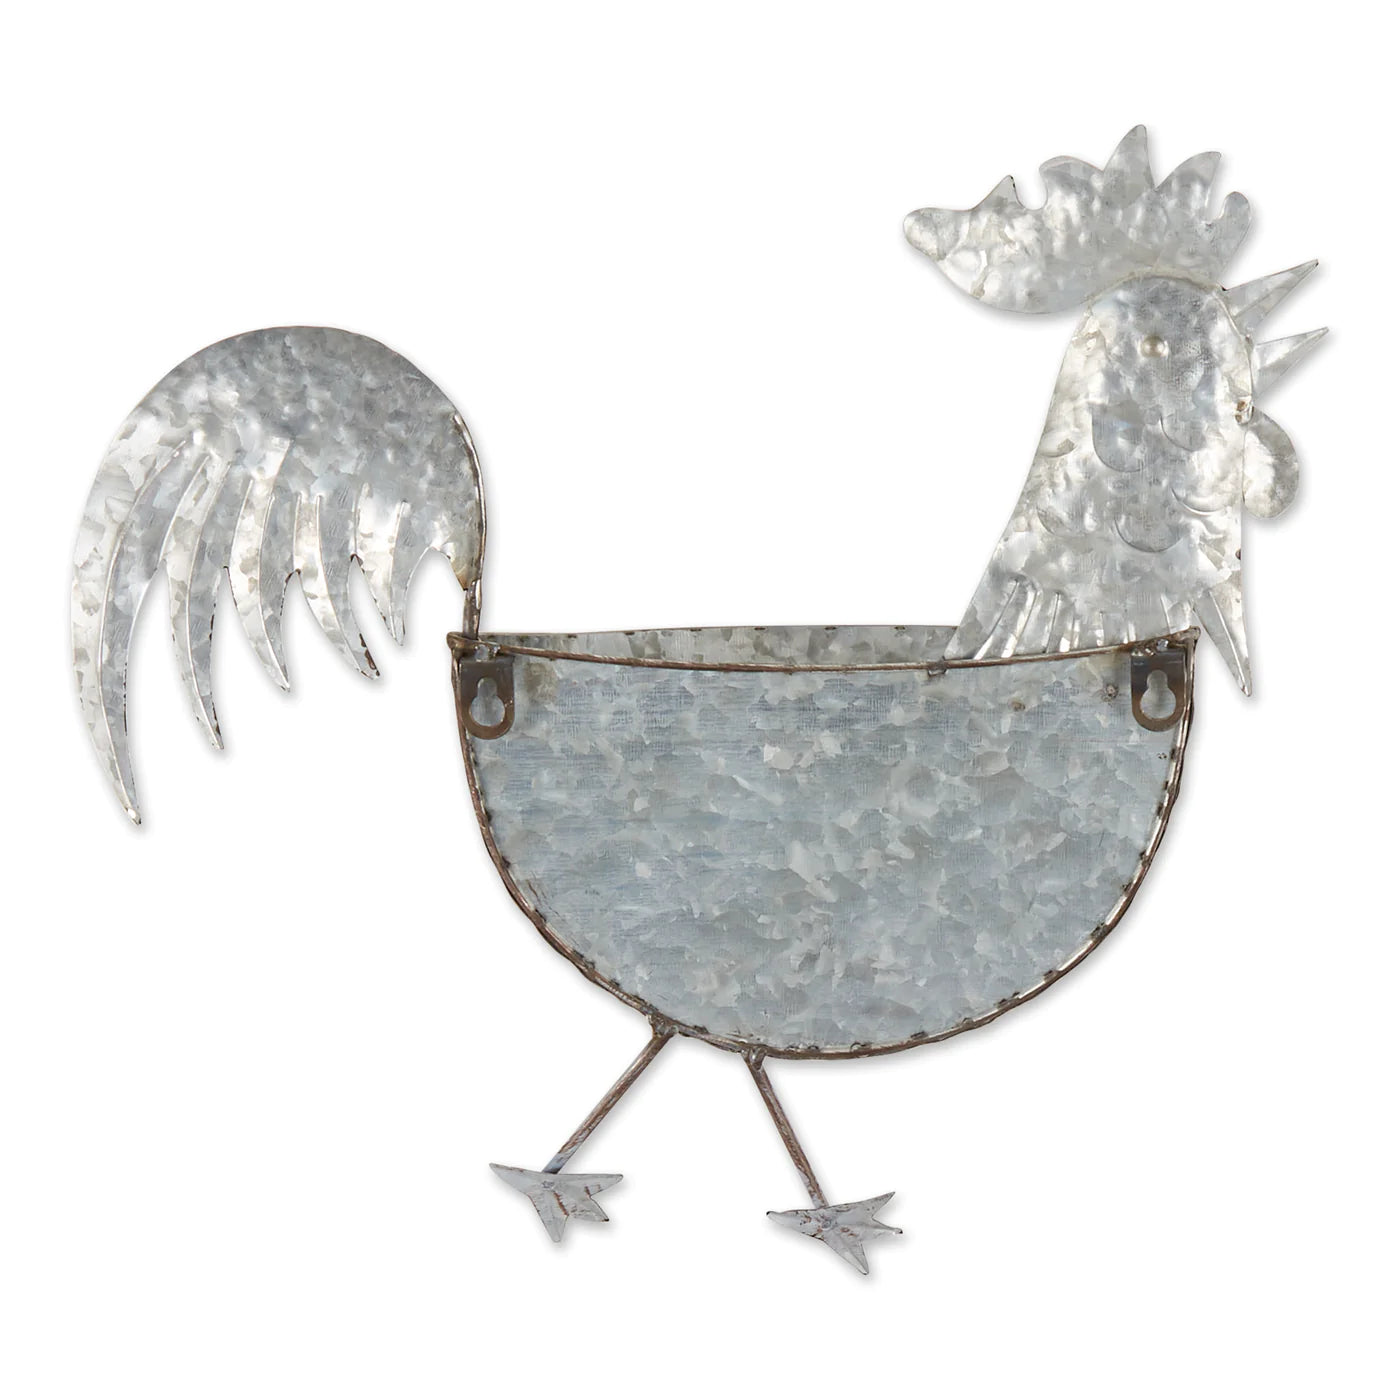 Rooster Galvanized Wall Planter ( Discontinued )